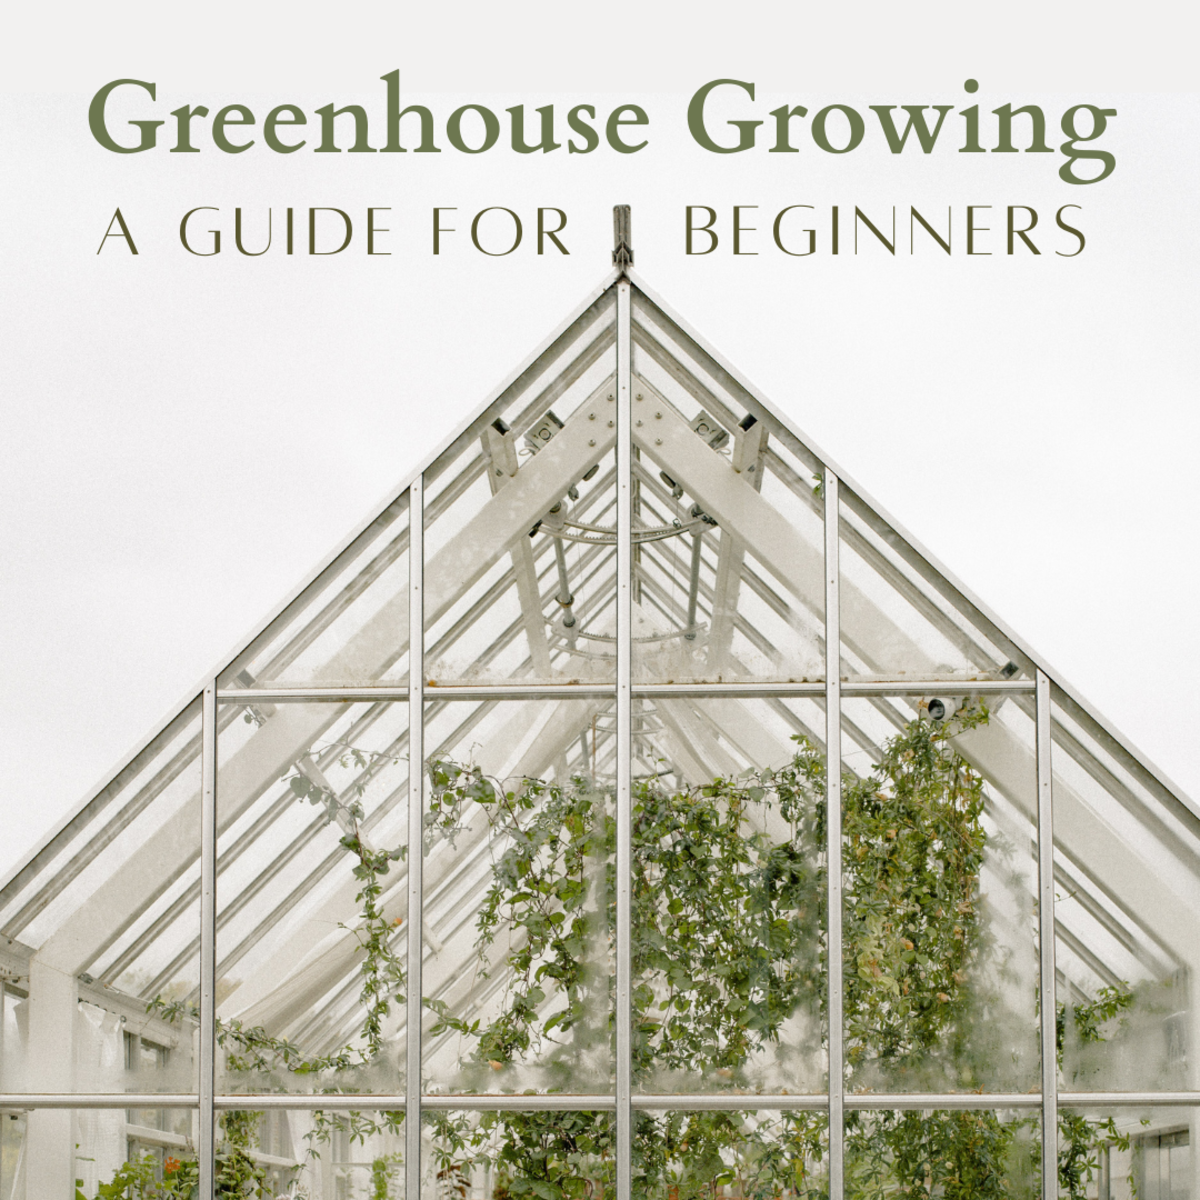 This article will provide all the essential information you need to maintain a greenhouse growing project.